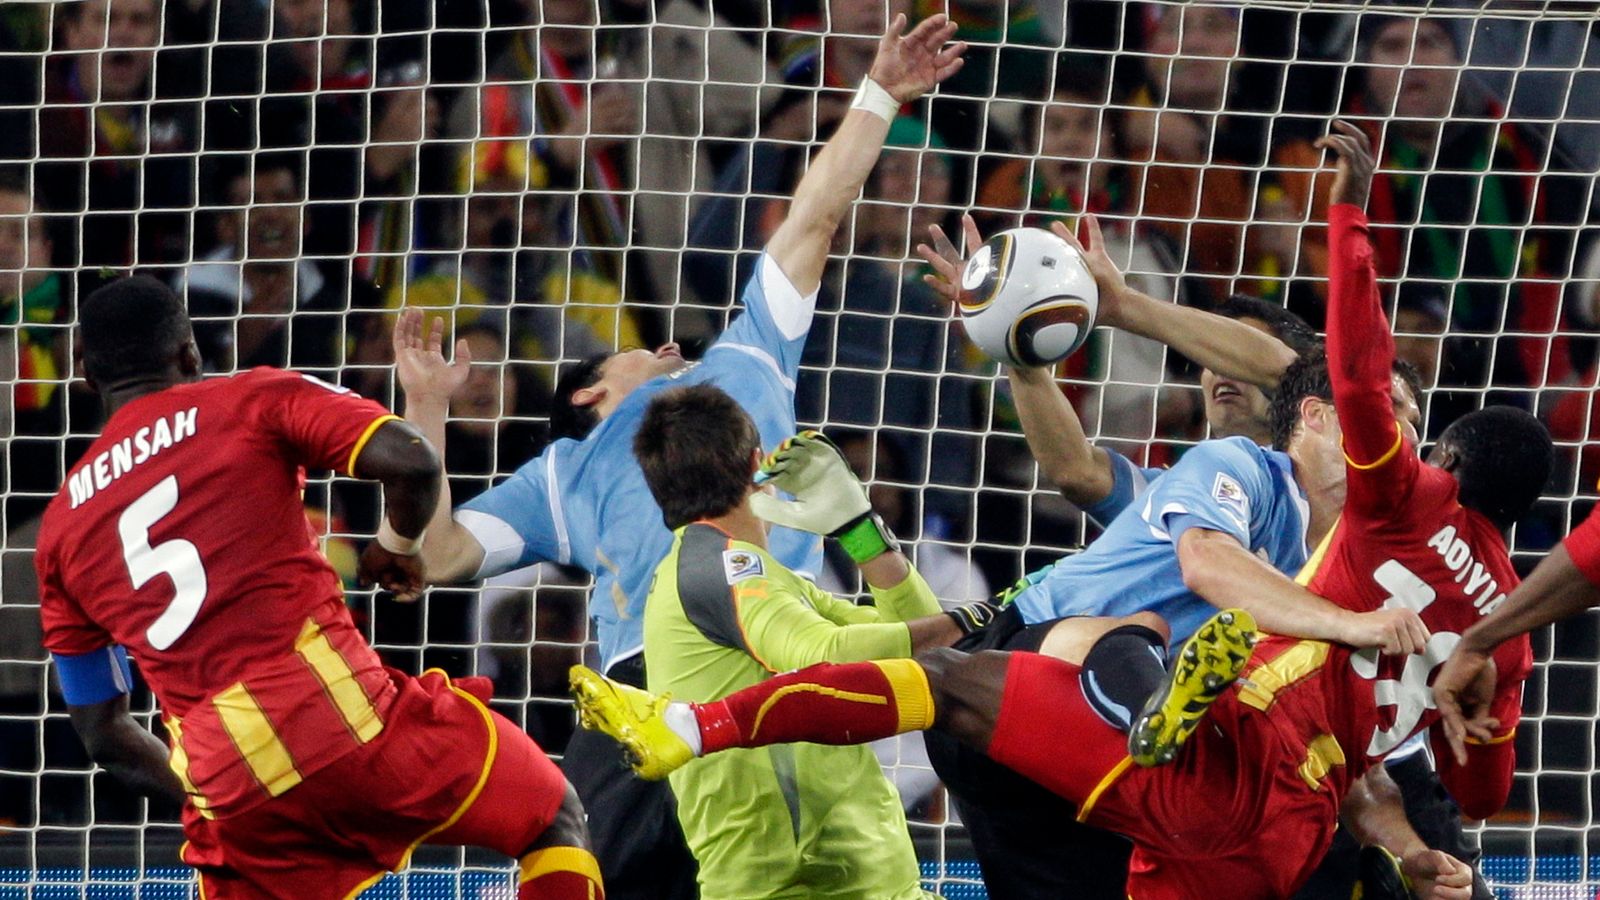 Ghana vs Uruguay: Derek Boateng forgives Luis Suarez for 2010 handball ahead of World Cup grudge match – but wife wants shirt out of the house